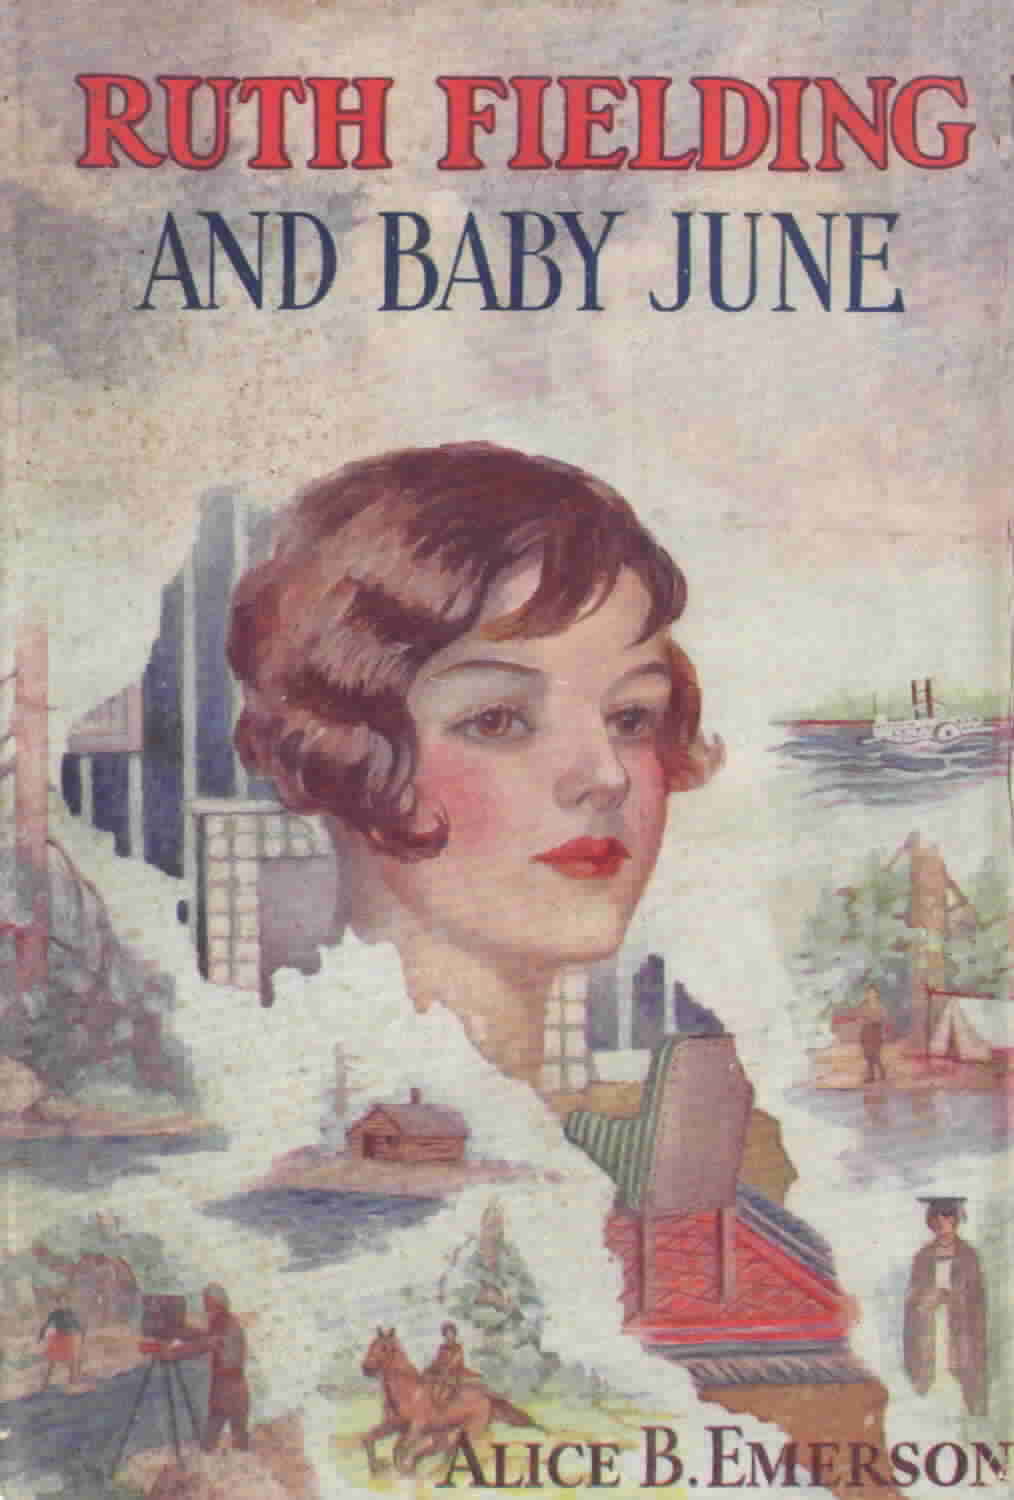 27. Ruth Fielding and Baby June